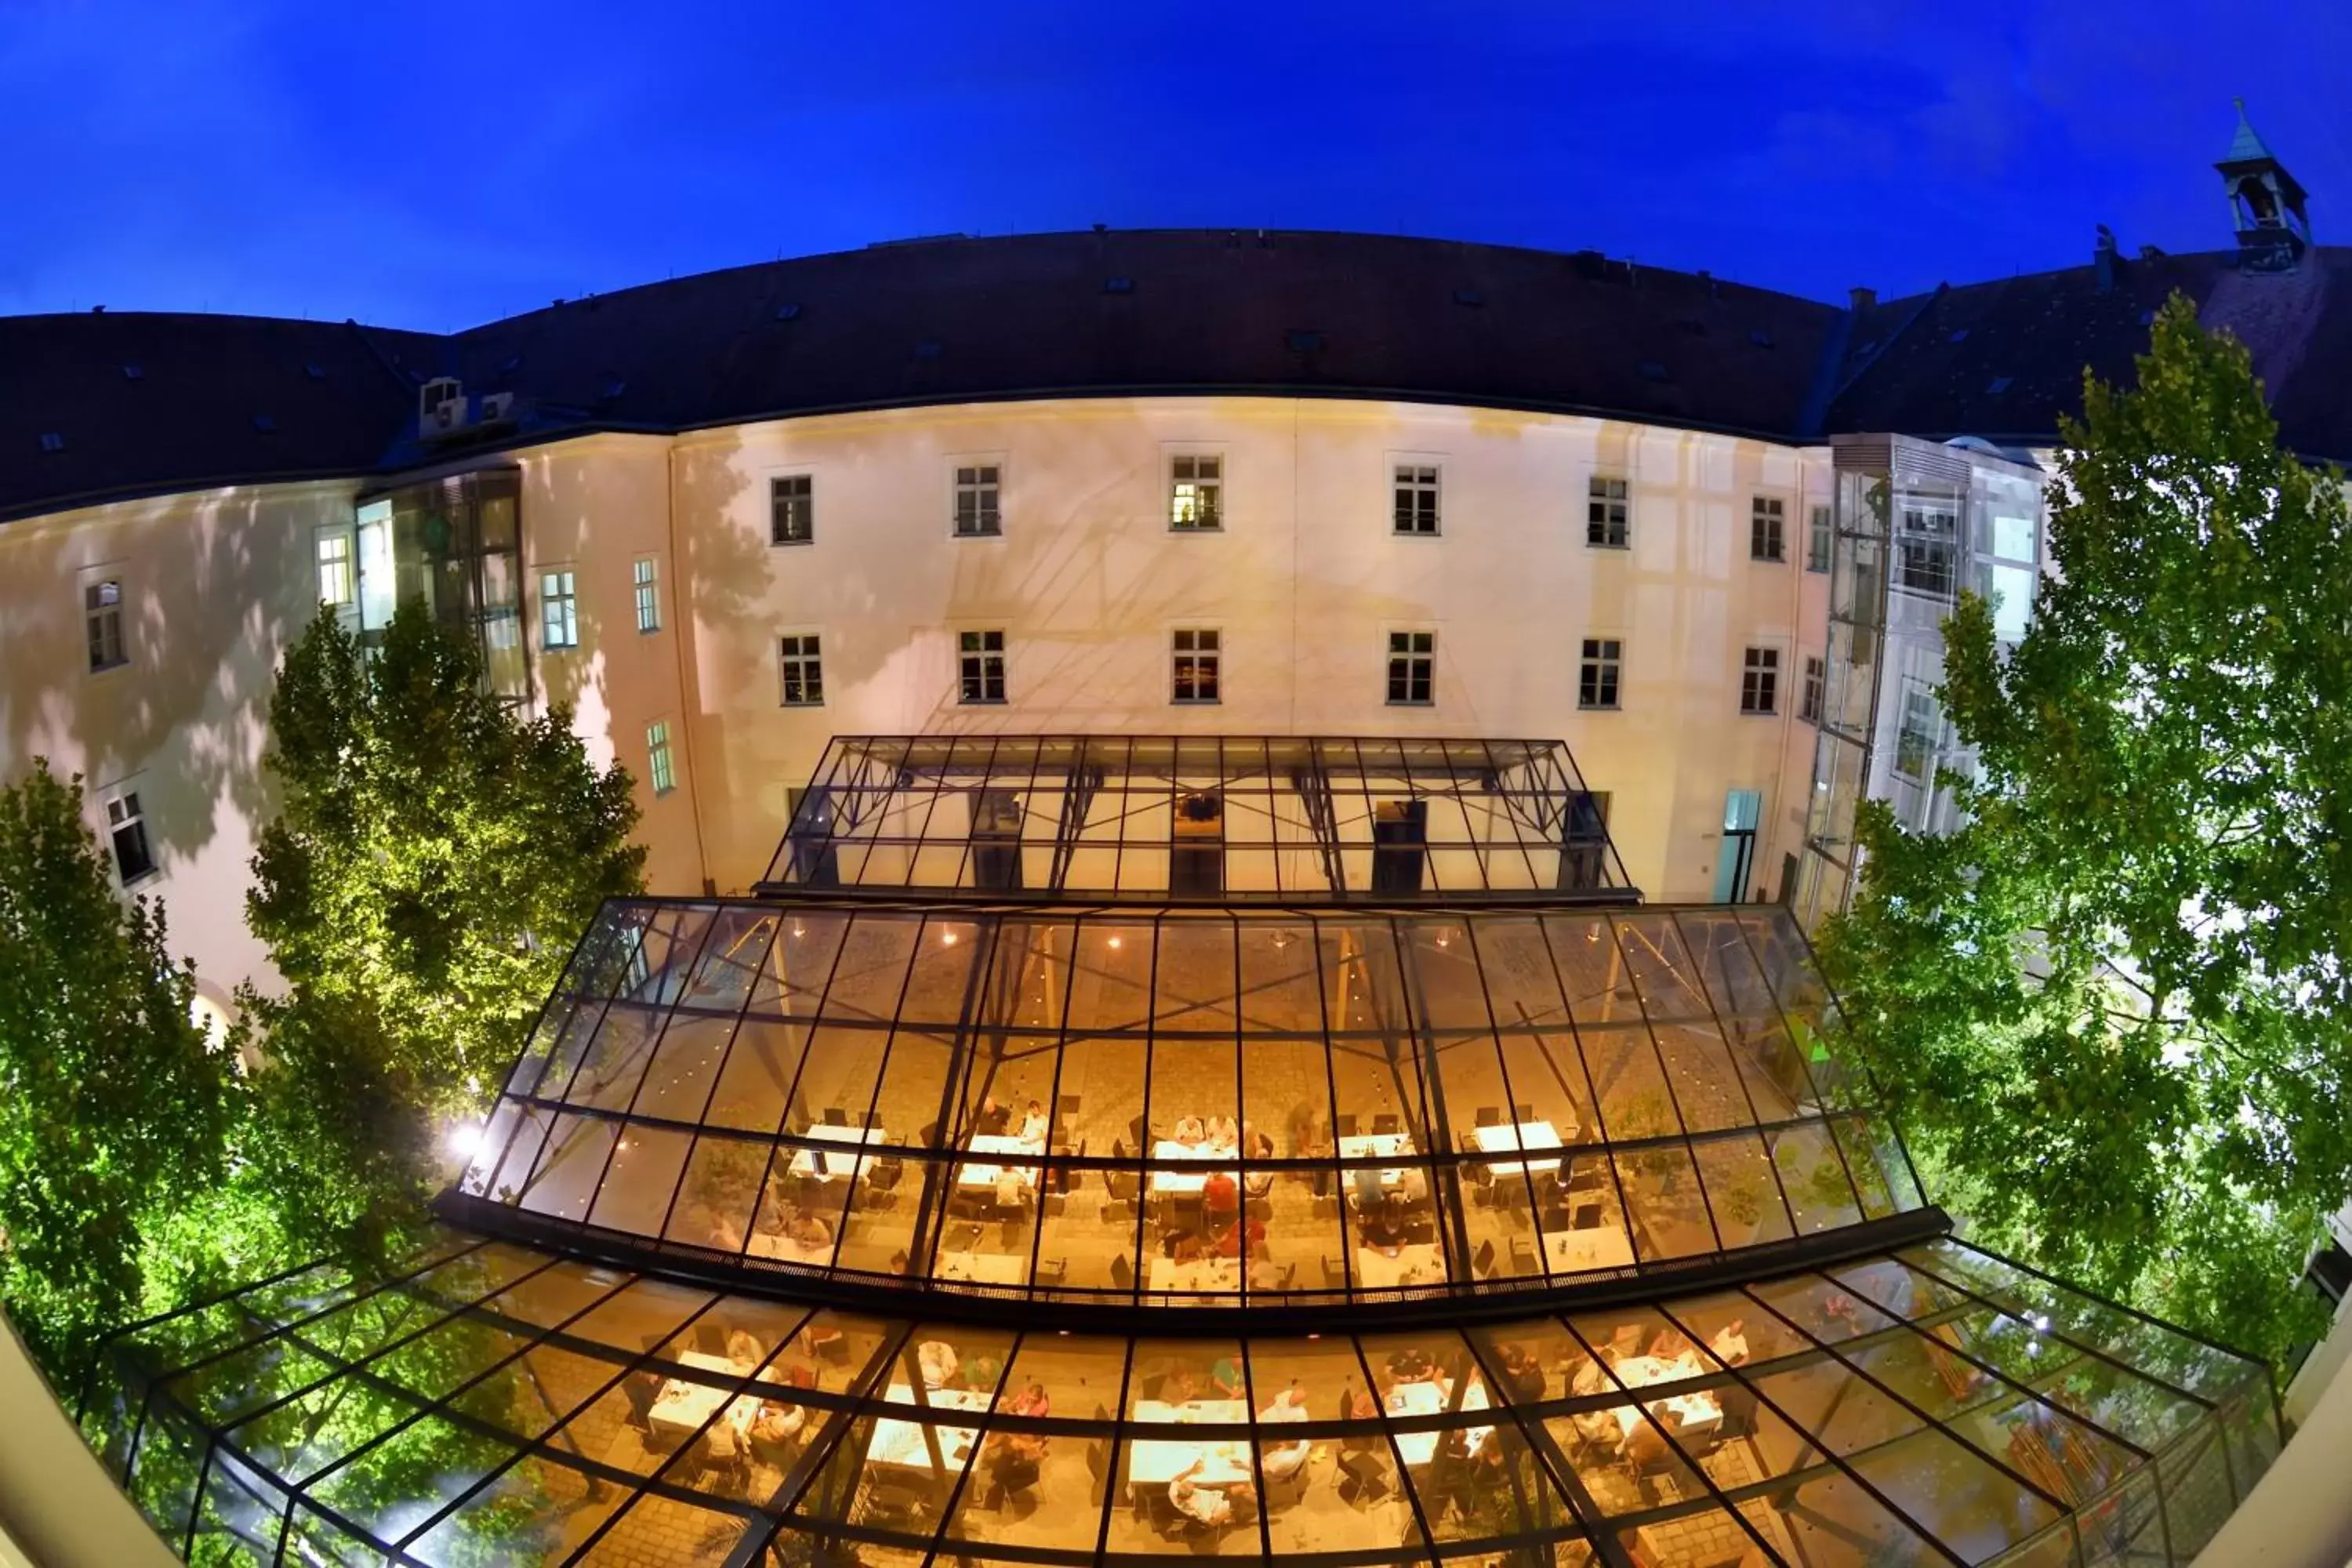 Bird's eye view, Property Building in Hotel Altes Kloster